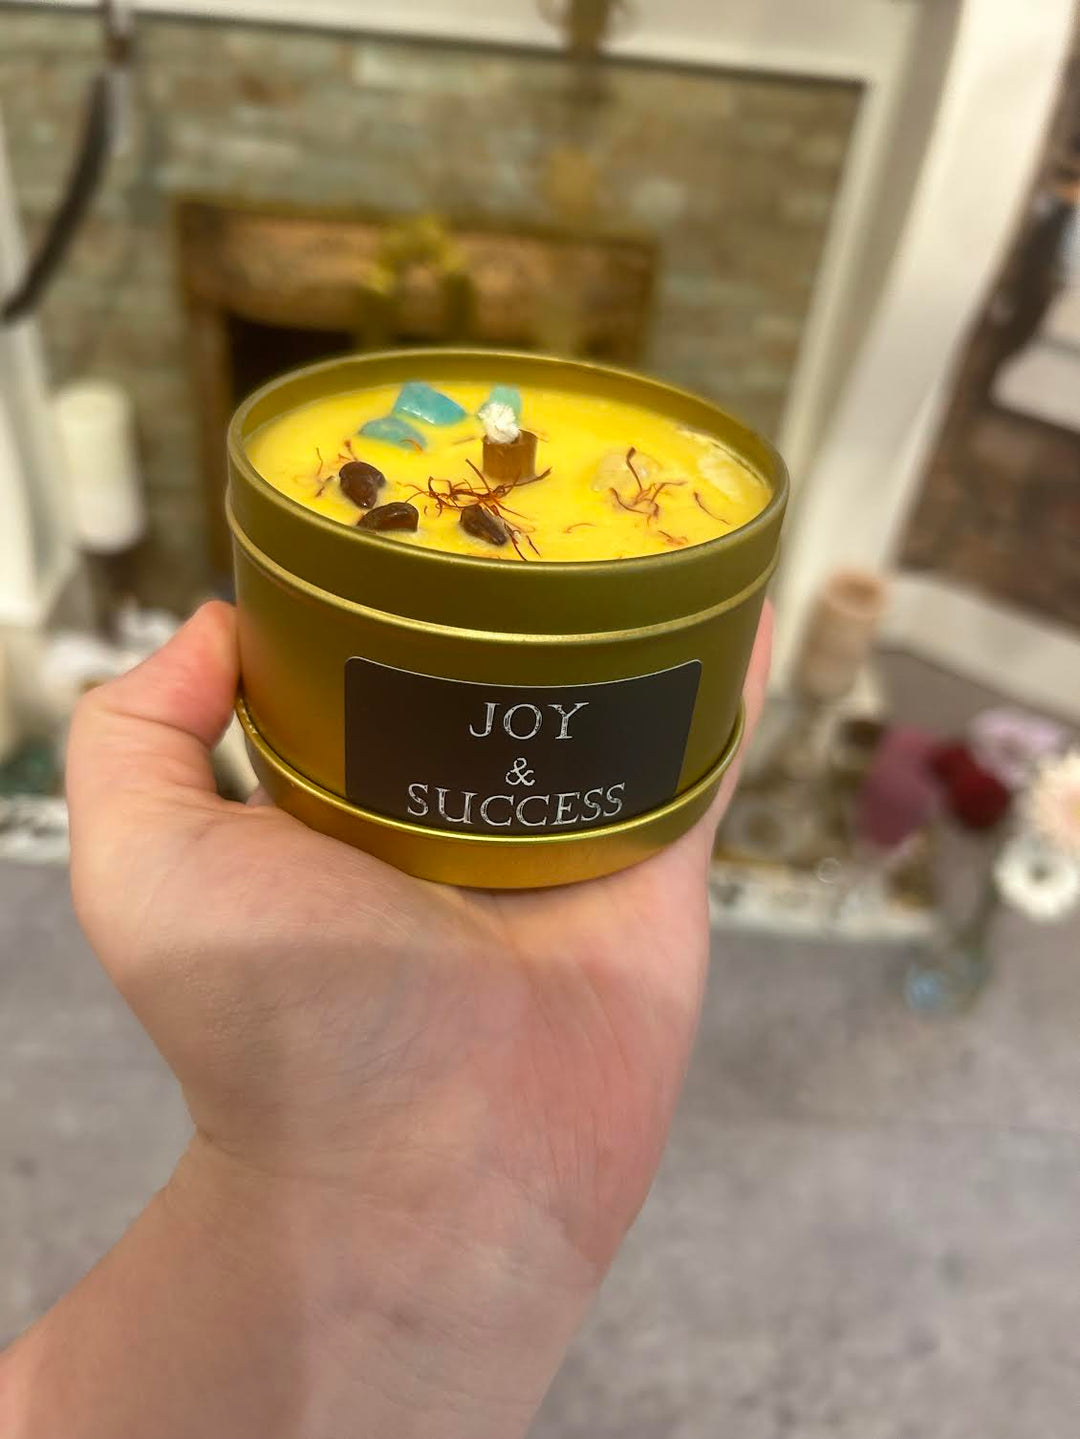 This is the front of the Joy and Success candle